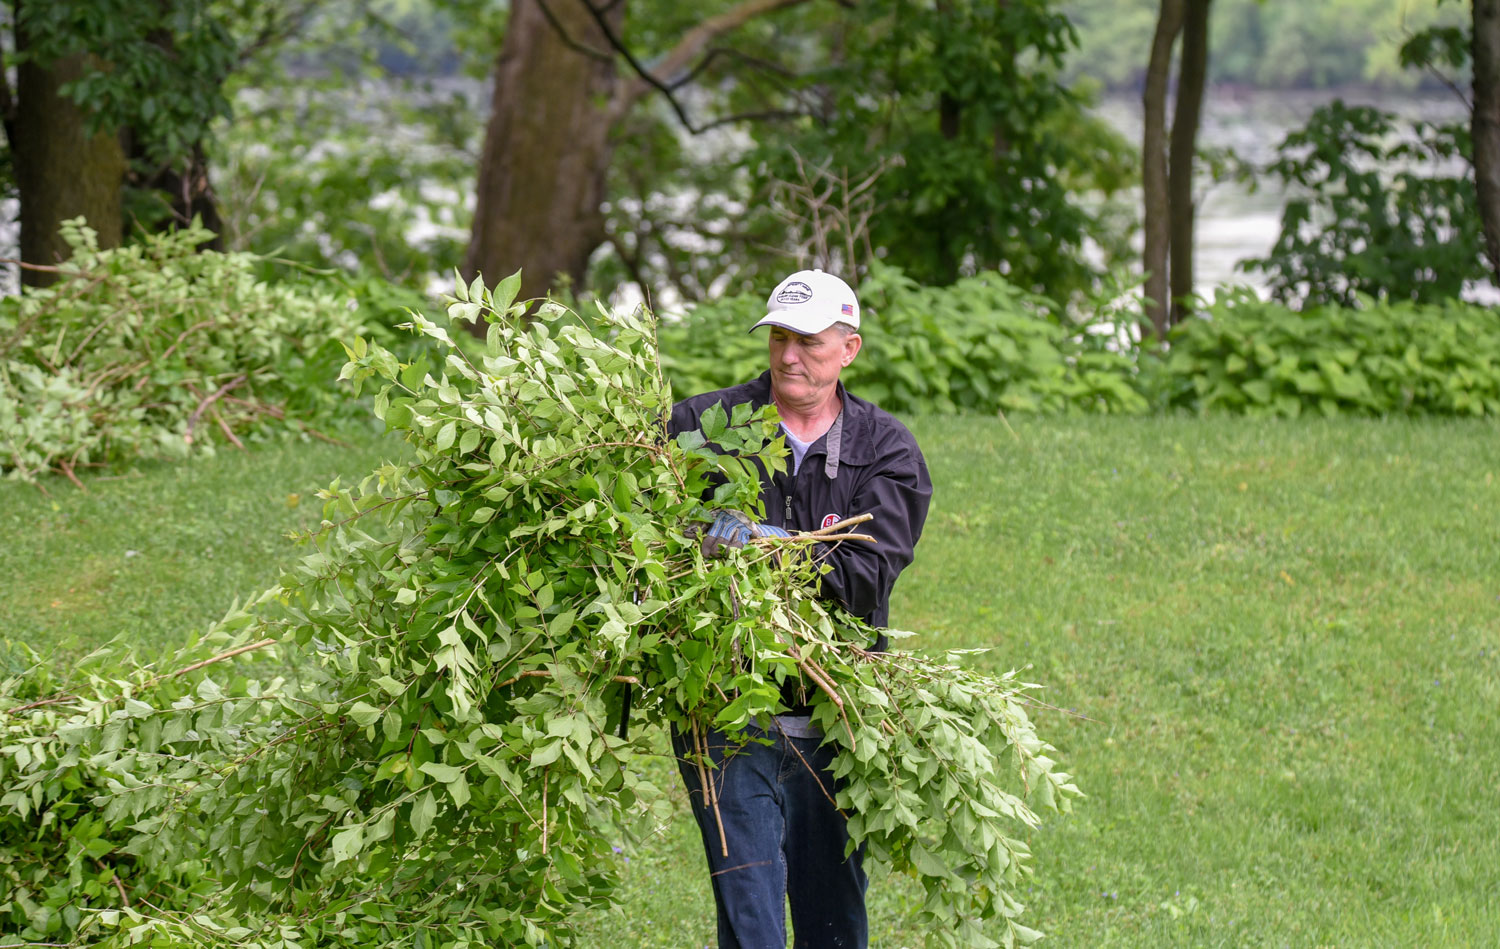 A person carrying an armful of cut branches.